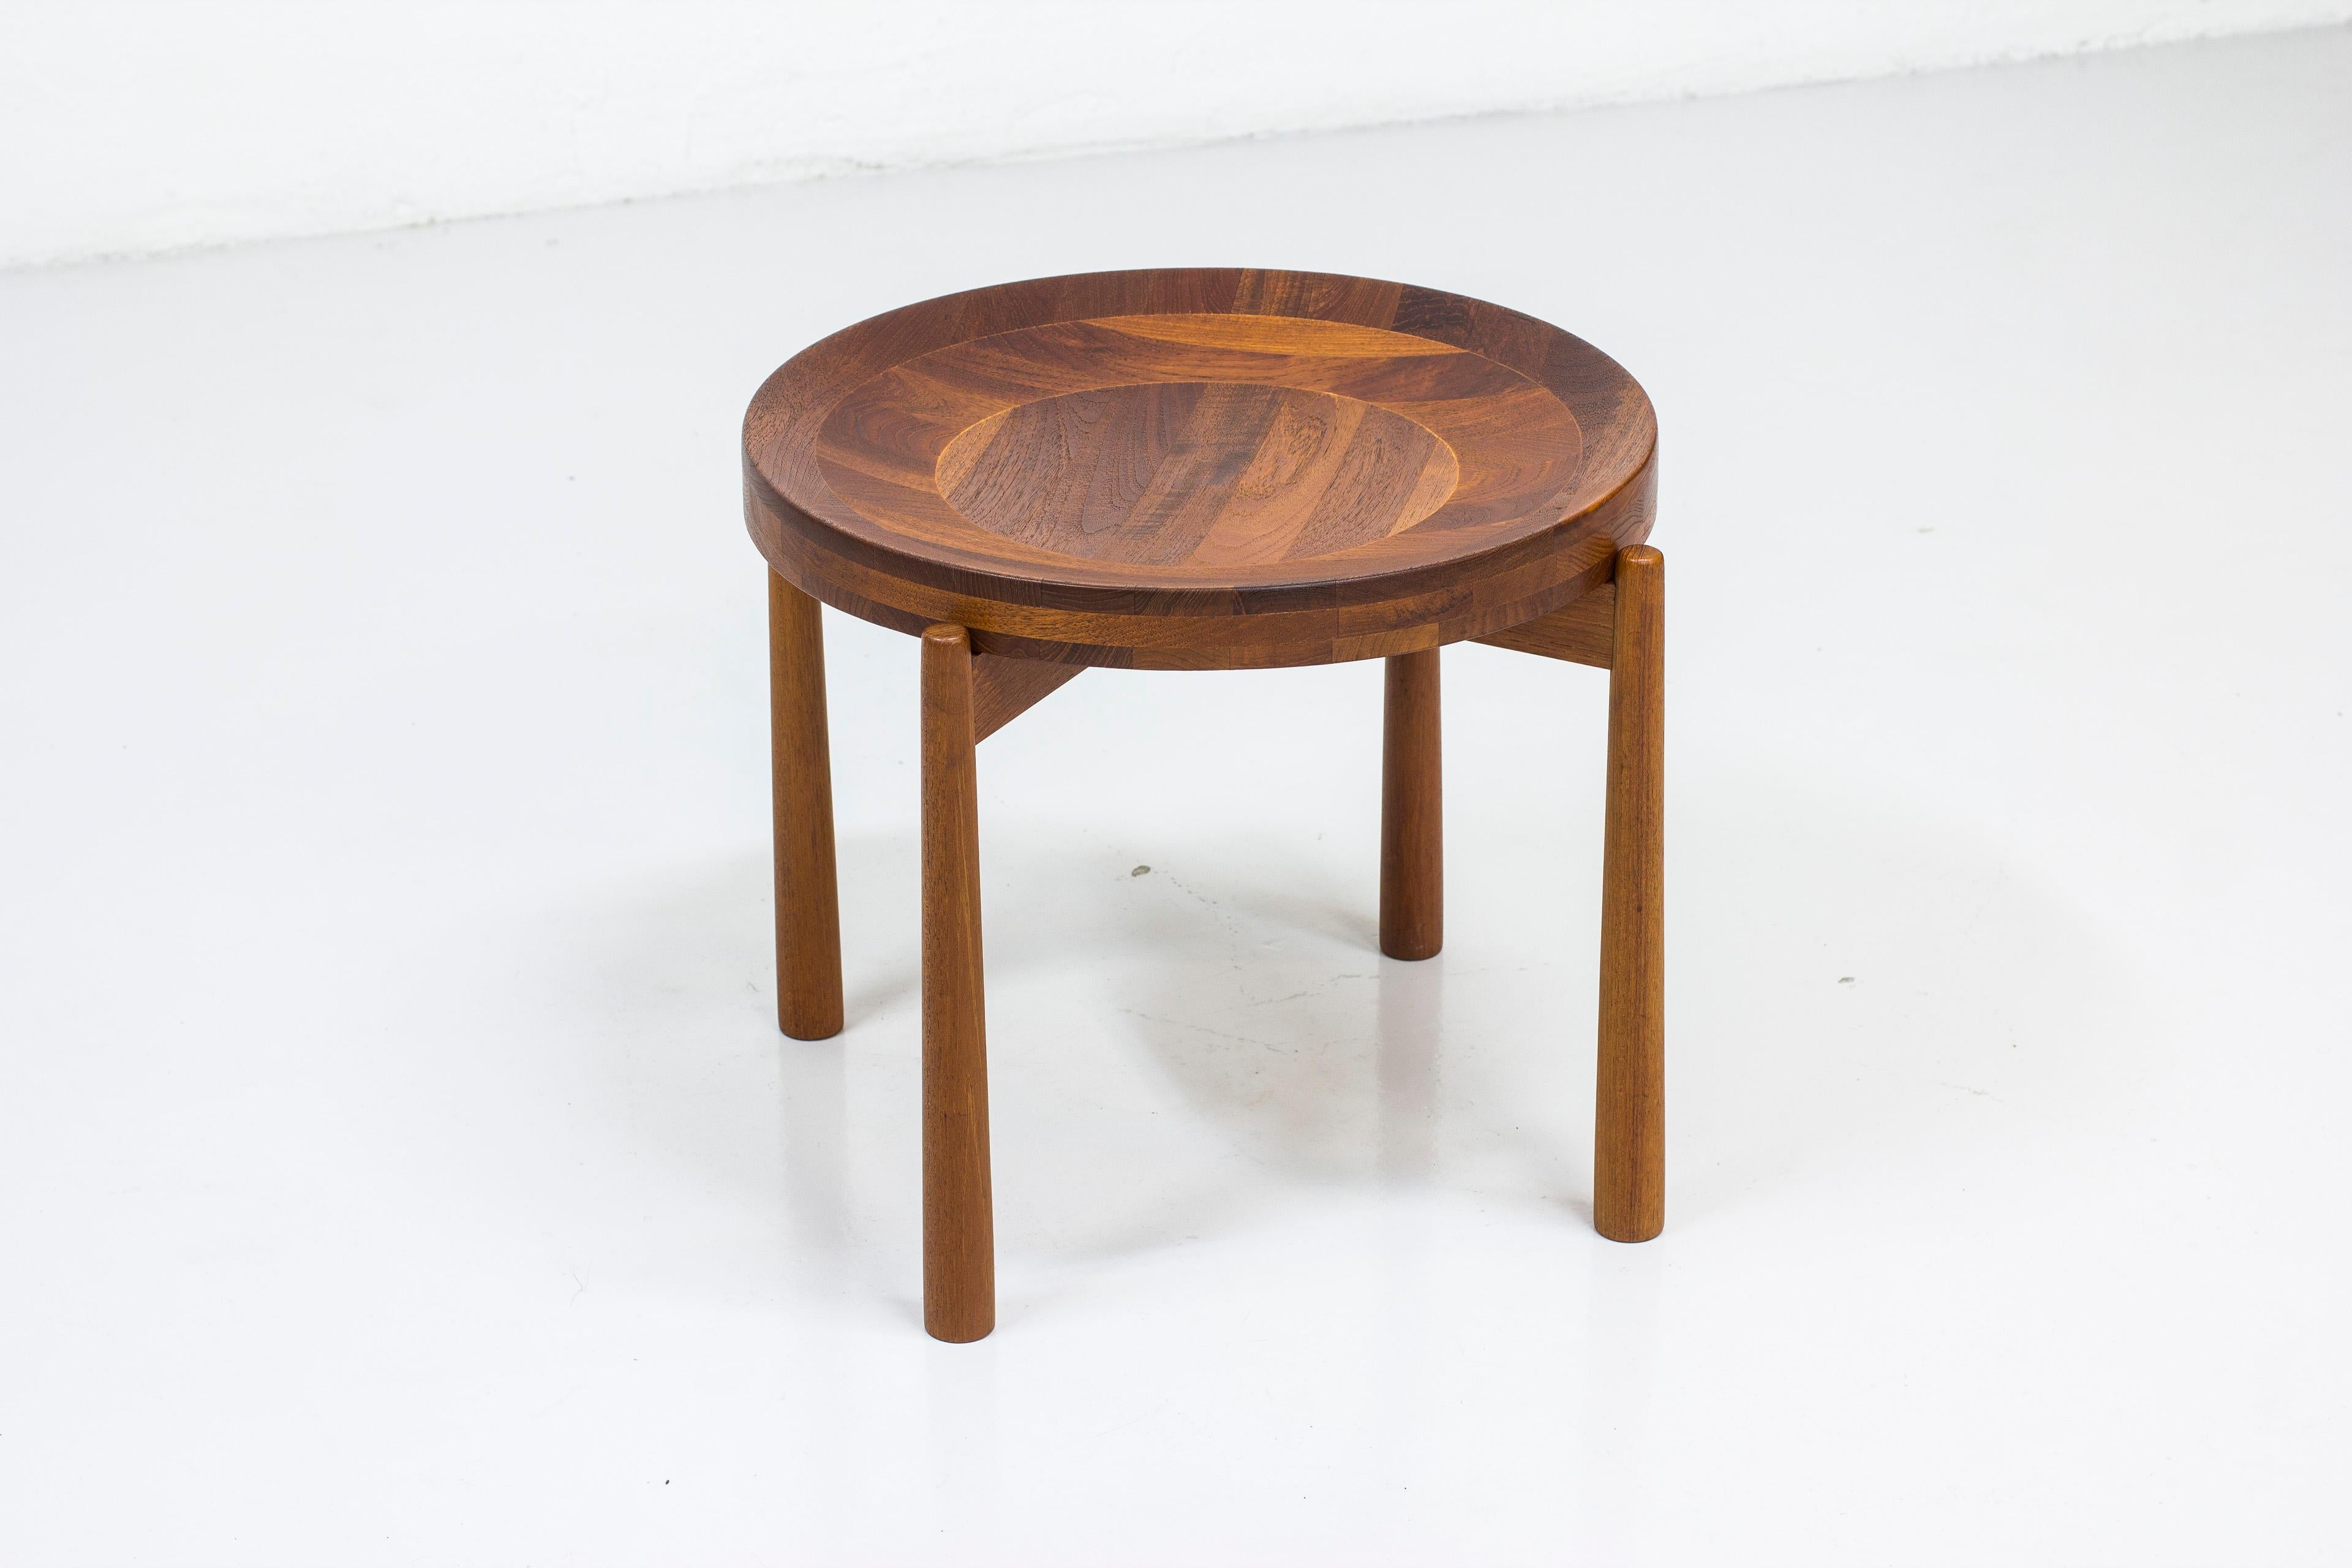 Side table/fruit bowl designed by Jens Harald Quistgaard. Produced in Denmark by Nissen. Made from solid teak and solid staved teak wood. Very good vintage condition with minor signs of age related wear and use.